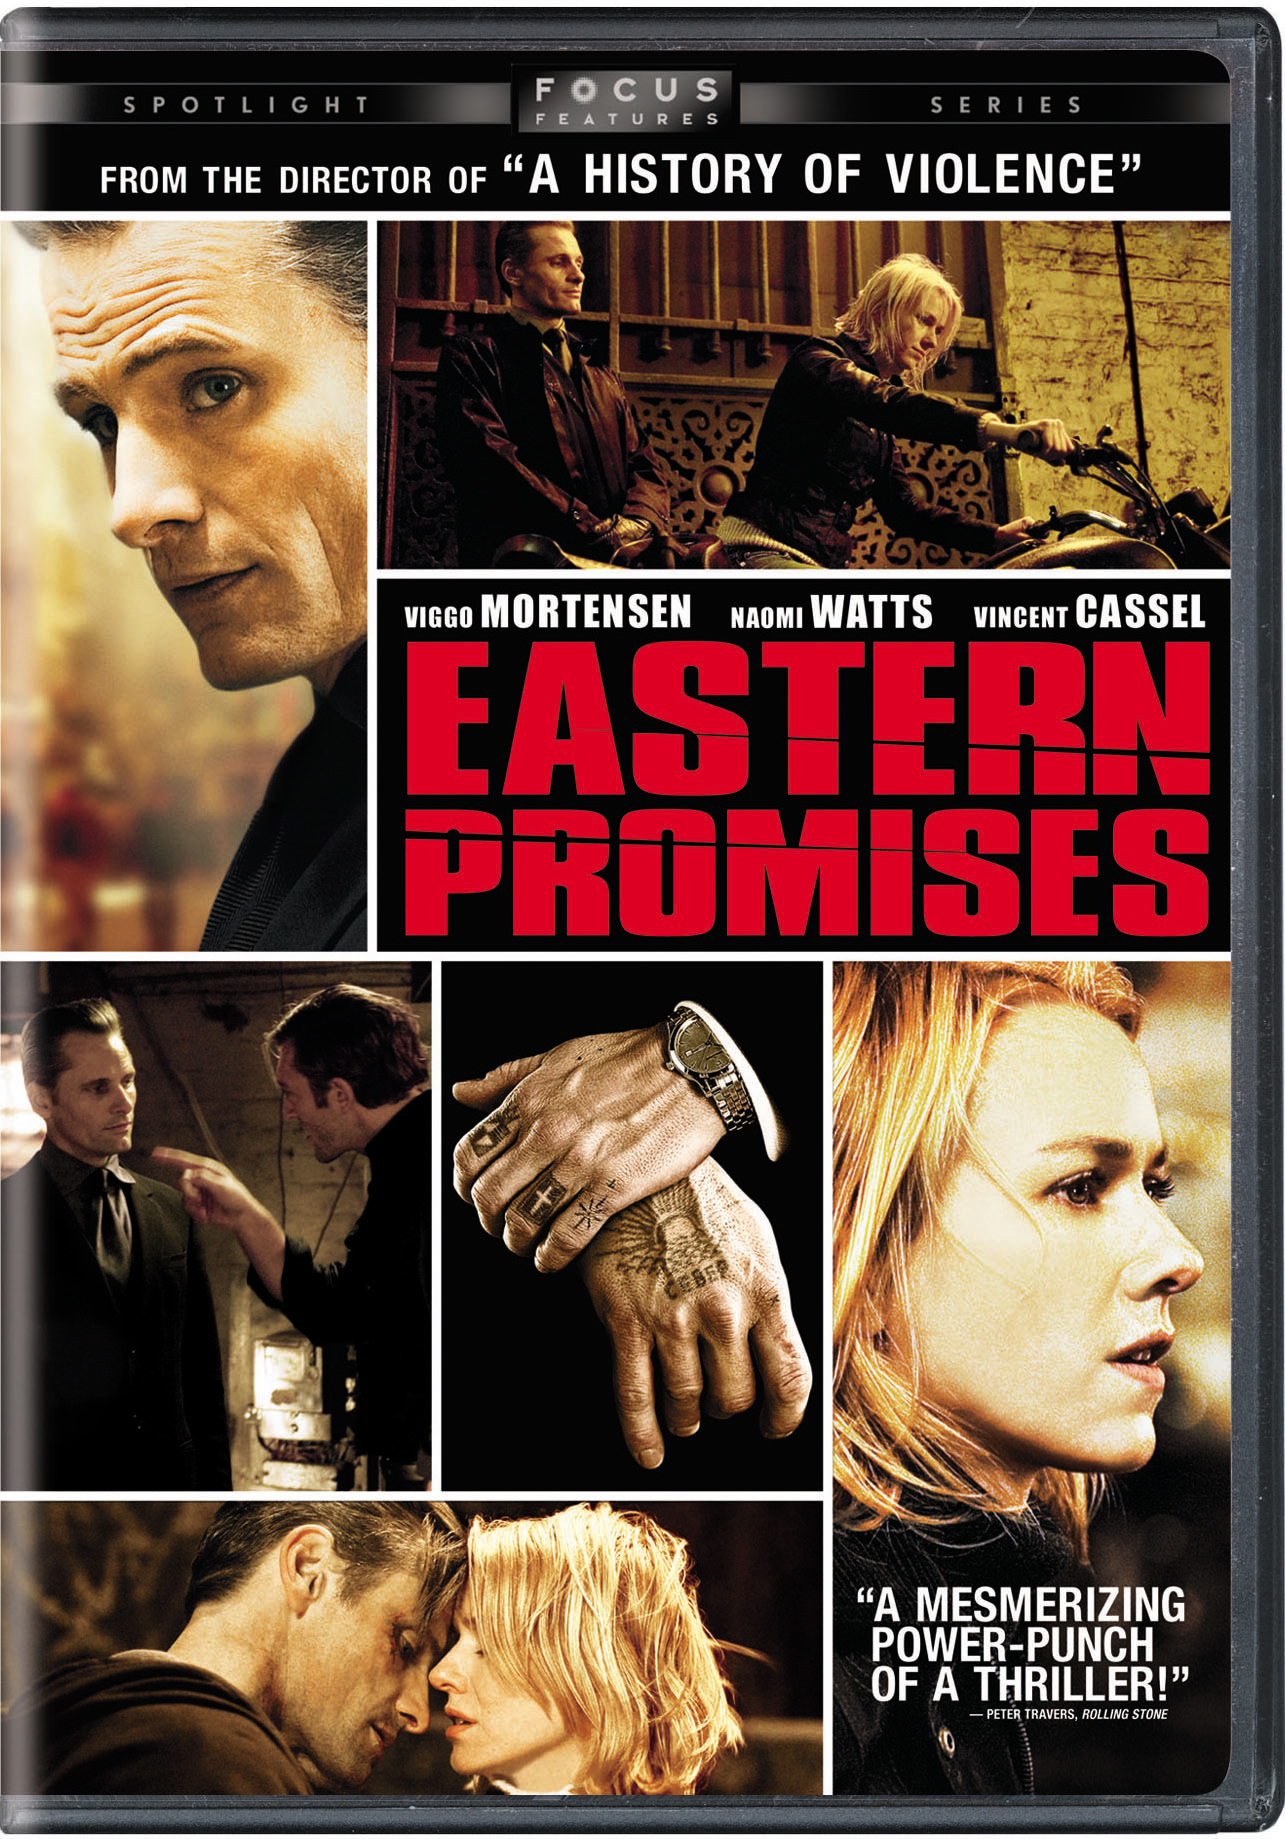 Eastern Promises (DVD Widescreen) - DVD [ 2007 ]  - Thriller Movies On DVD - Movies On GRUV